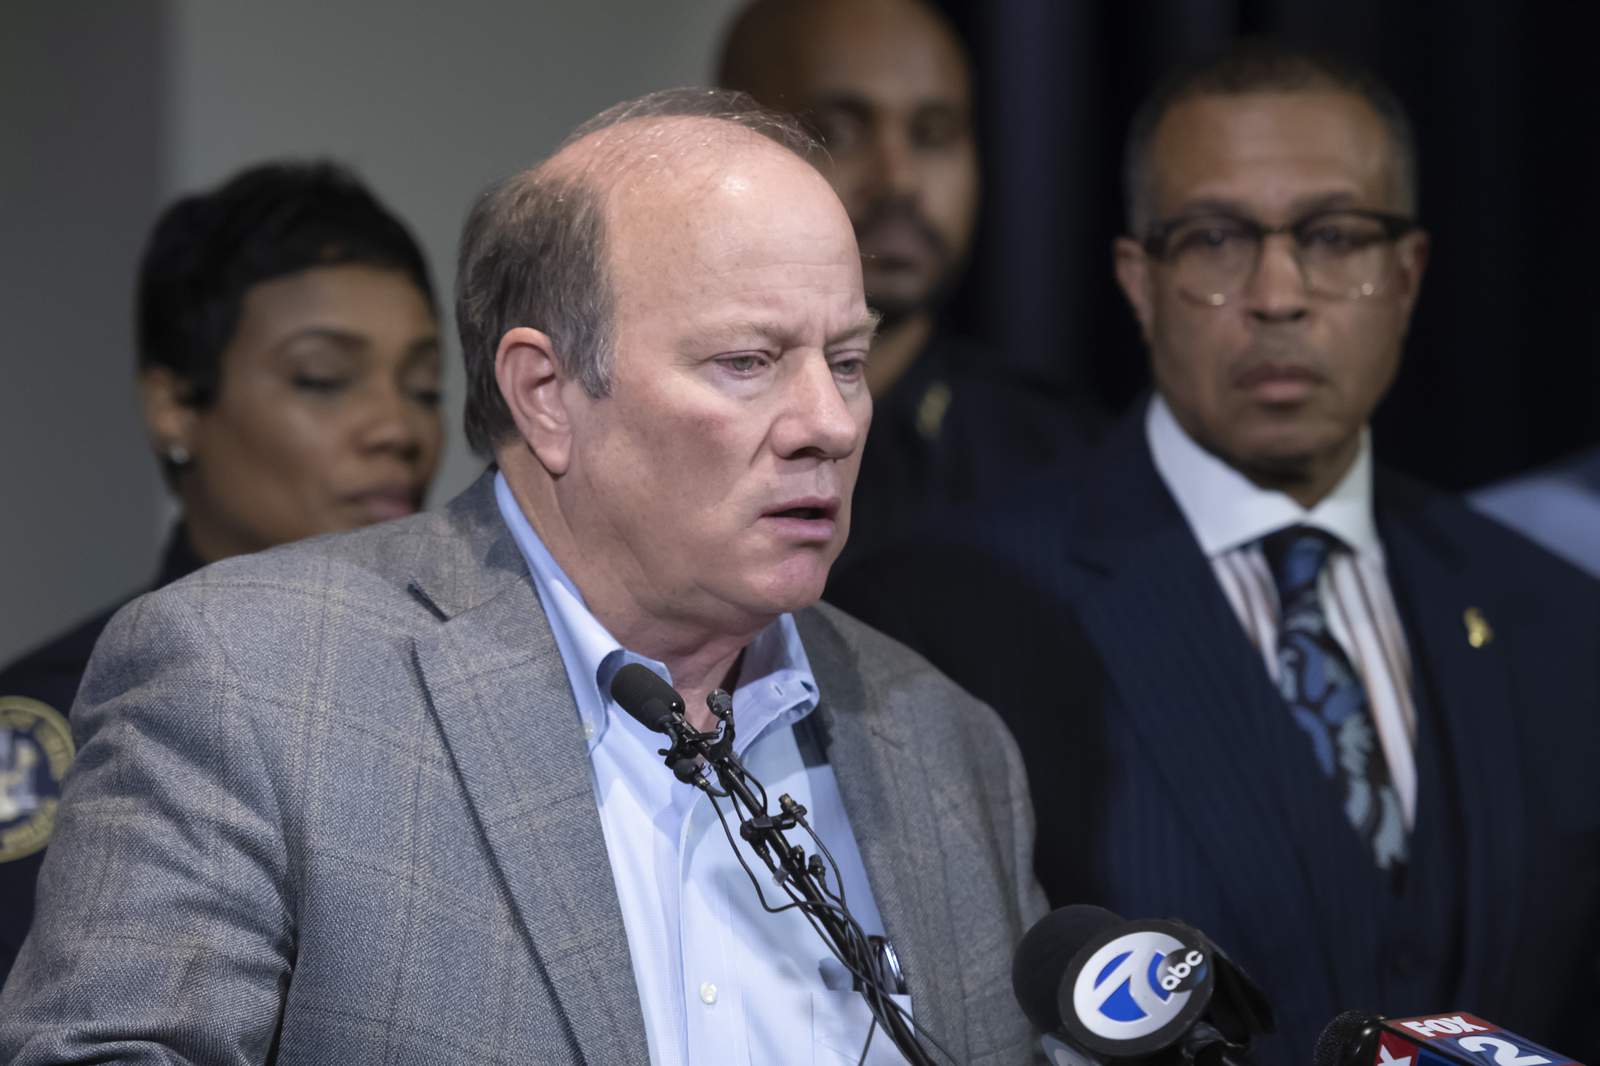 No possible justification: Detroit mayor, police chief respond to threat of federal troop deployment